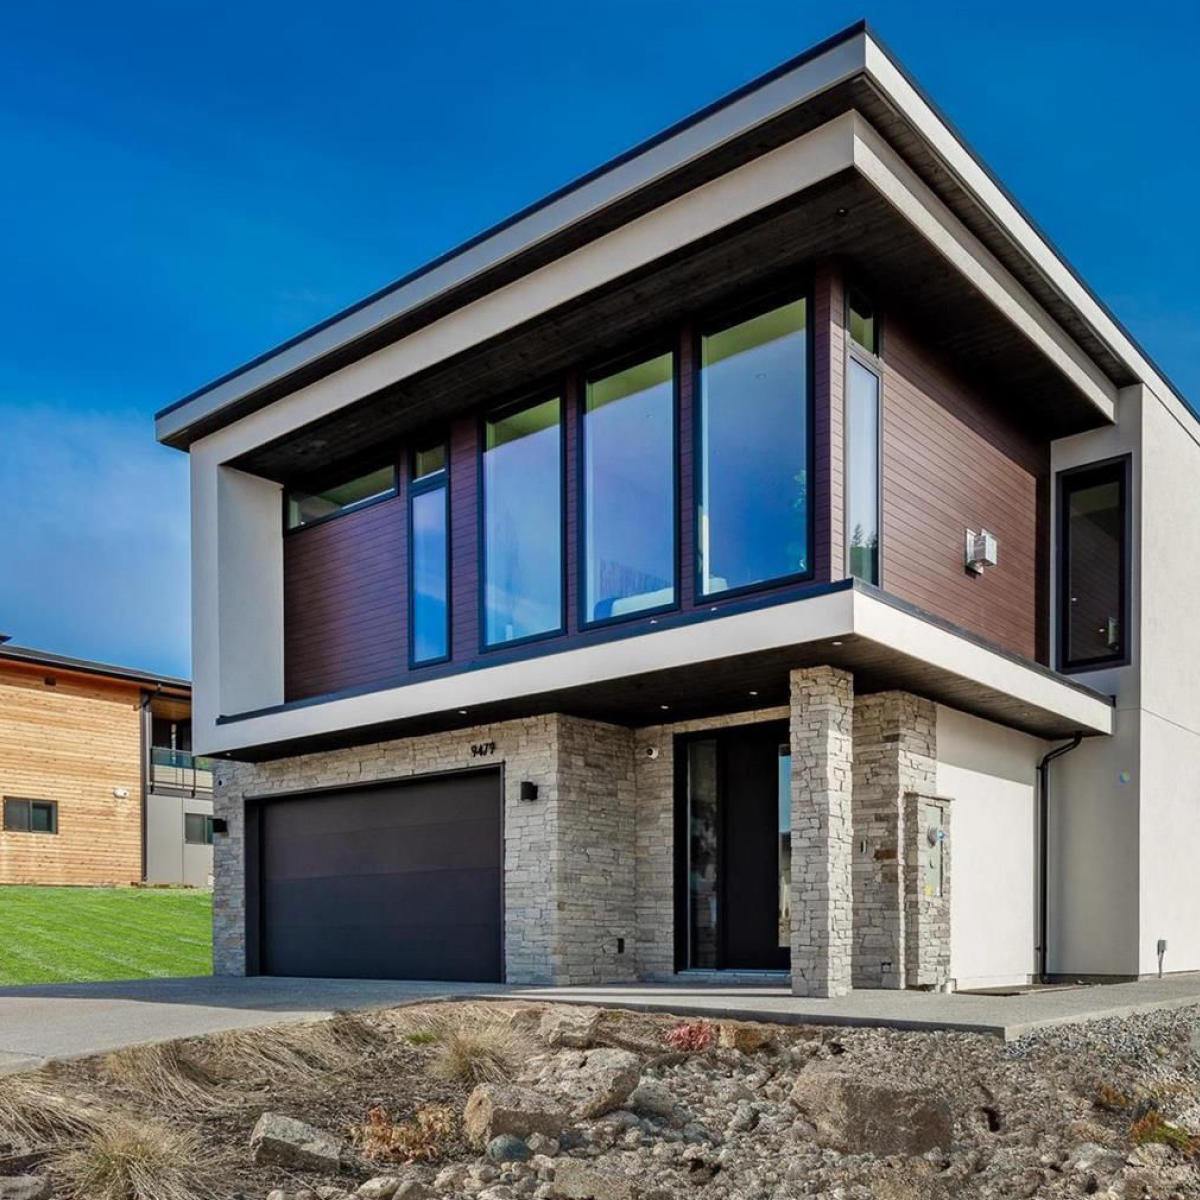 image  1 Welcome to this stunning new home in Lakestone, built with the utmost attention to detail by award w